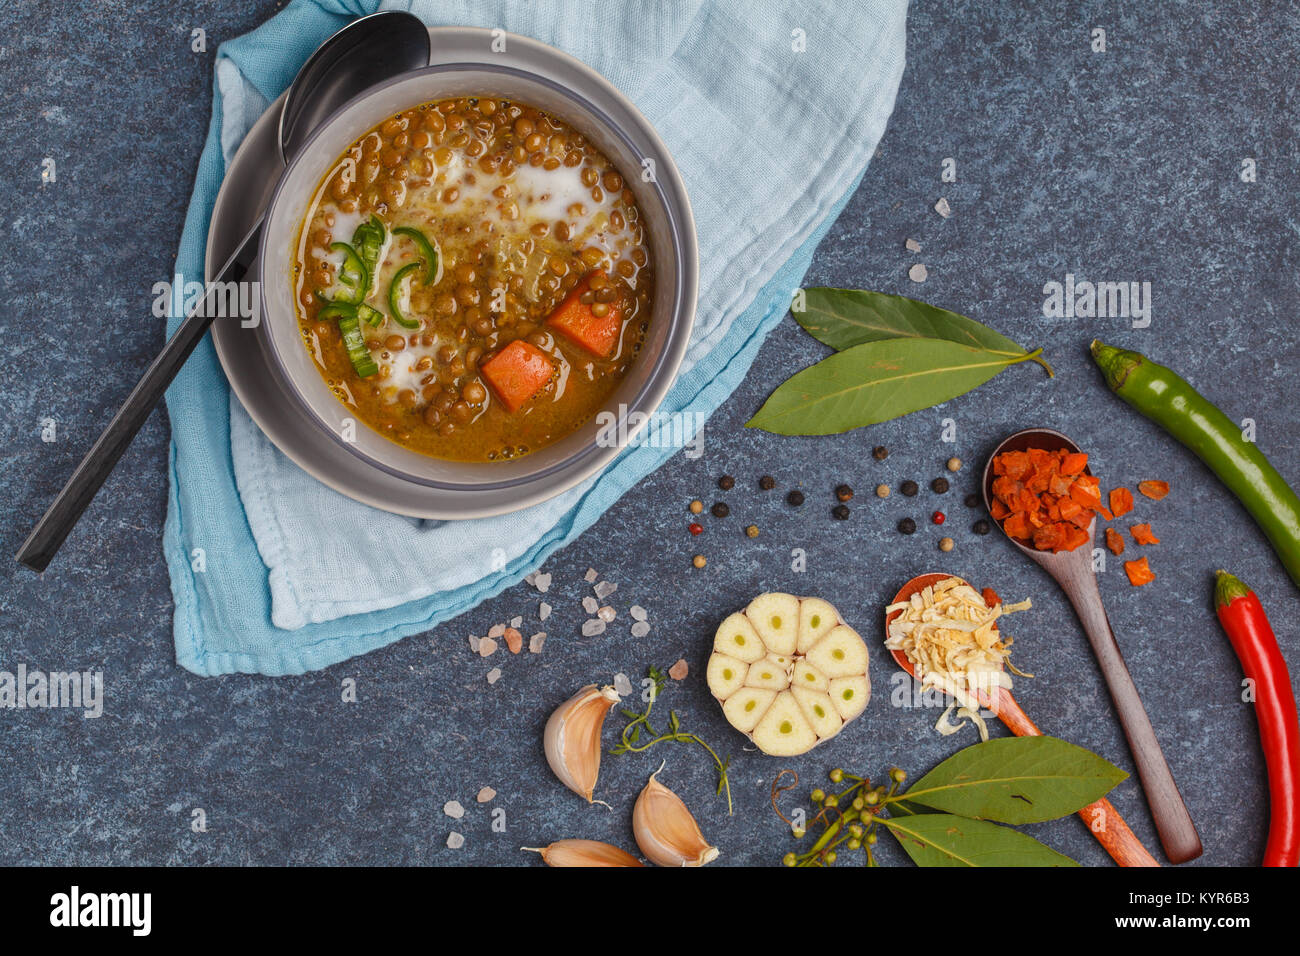 Indian vegetarian lentil soup, mung dal. Indian food spice concept. Dark background, top view. Stock Photo